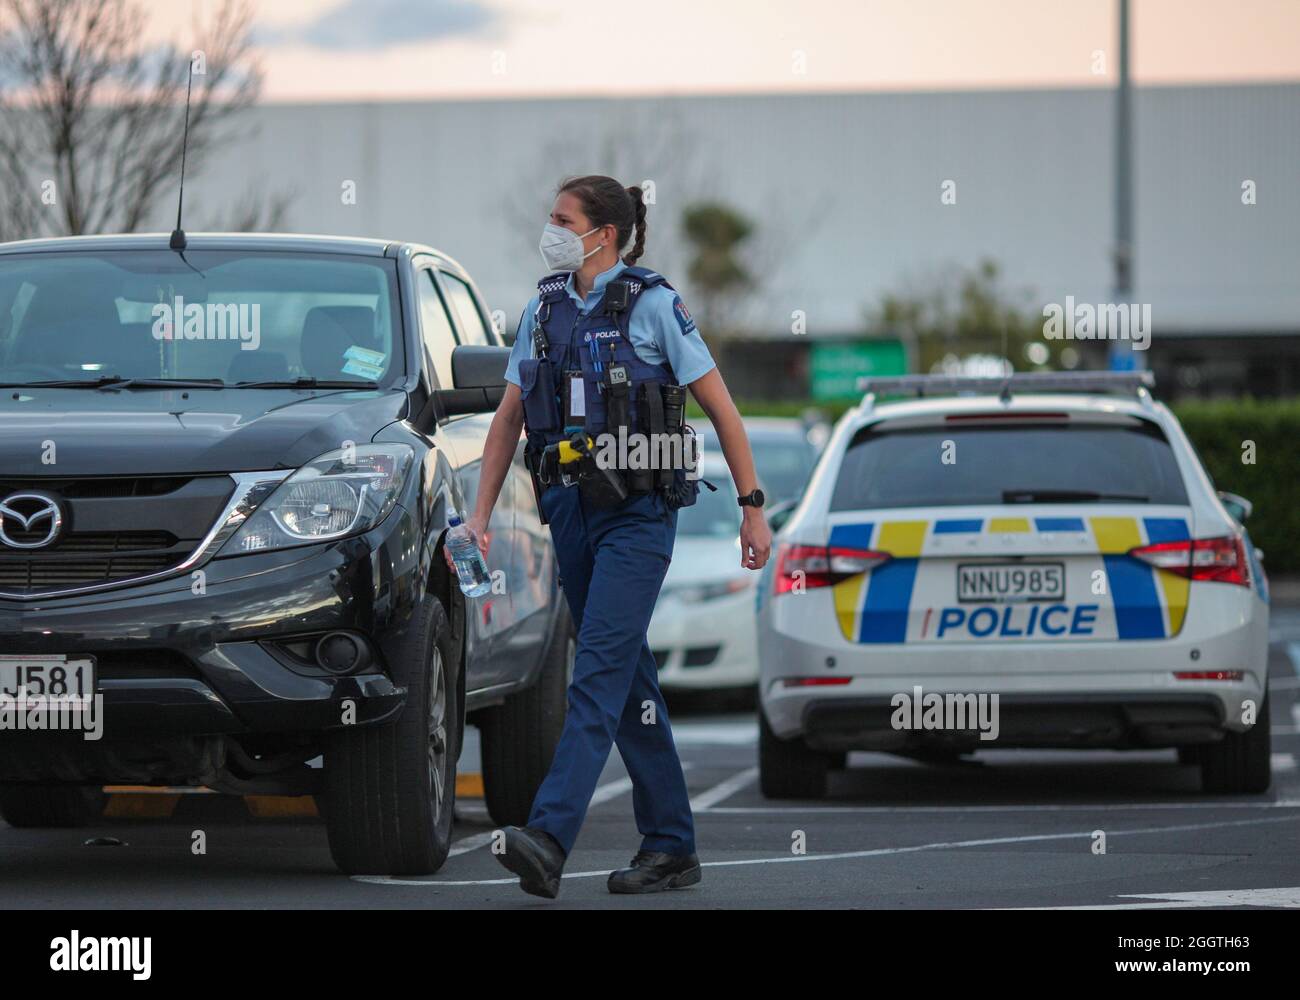 Auckland, New Zealand. 3rd Sep, 2021. A police officer stands guard near the New Lynn supermarket in Auckland, New Zealand, Sept. 3, 2021. New Zealand Prime Minister Jacinda Ardern confirmed that the violent attack that happened at New Lynn supermarket in Auckland at 2:40 p.m. local time Friday was a 'terrorist attack' carried out by an 'extremist.' Credit: Zhao Gang/Xinhua/Alamy Live News Stock Photo